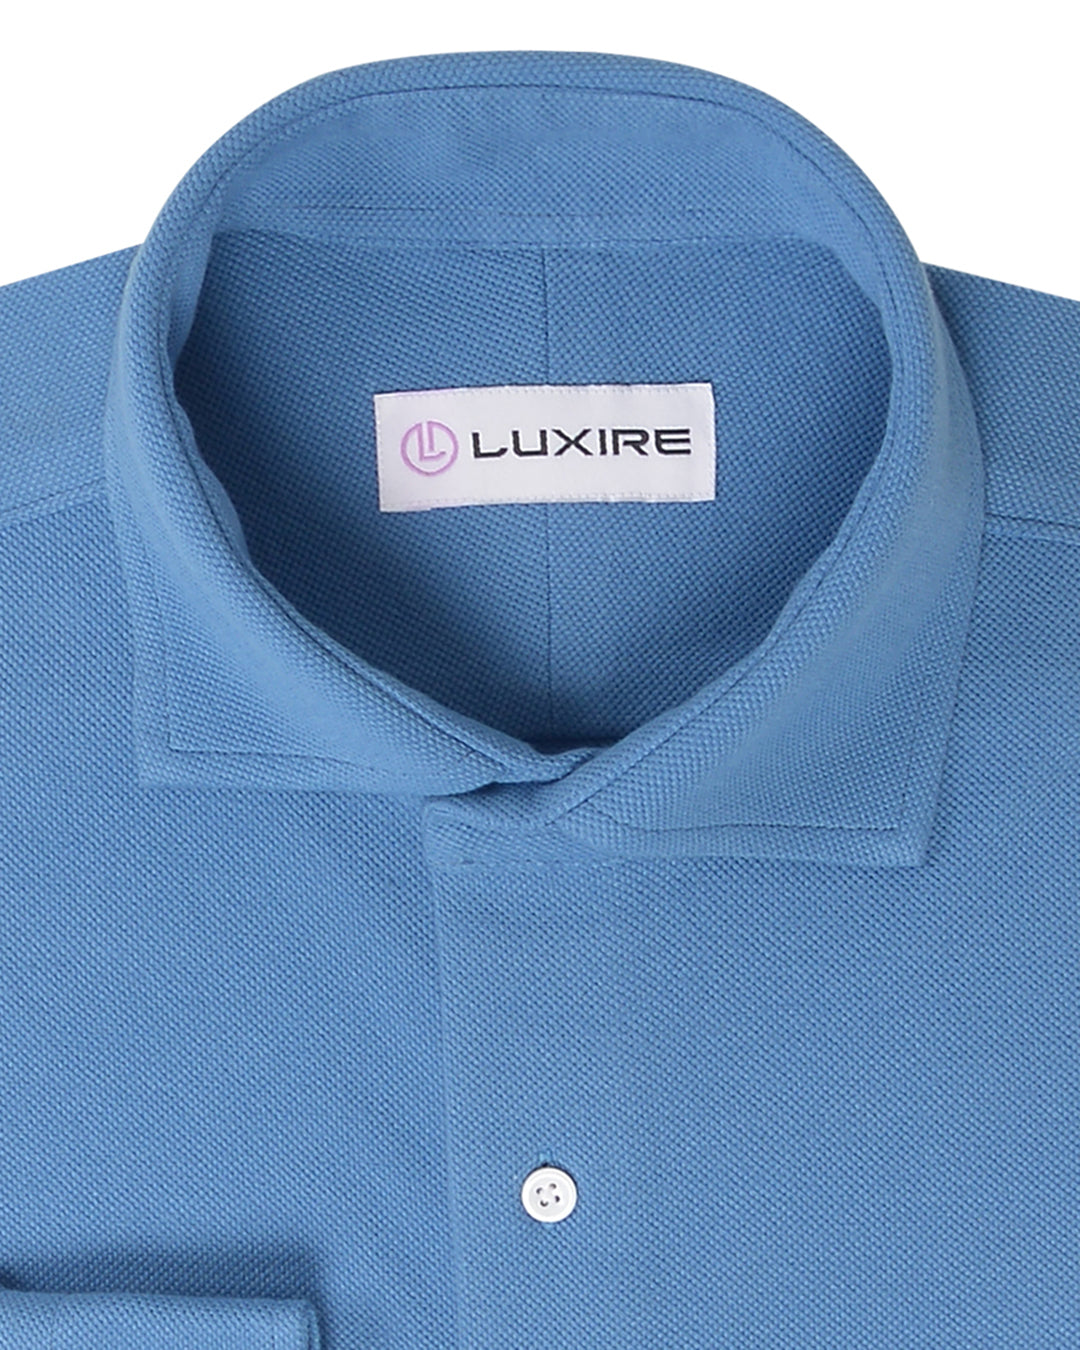 Olympic Blue Polo T-shirt